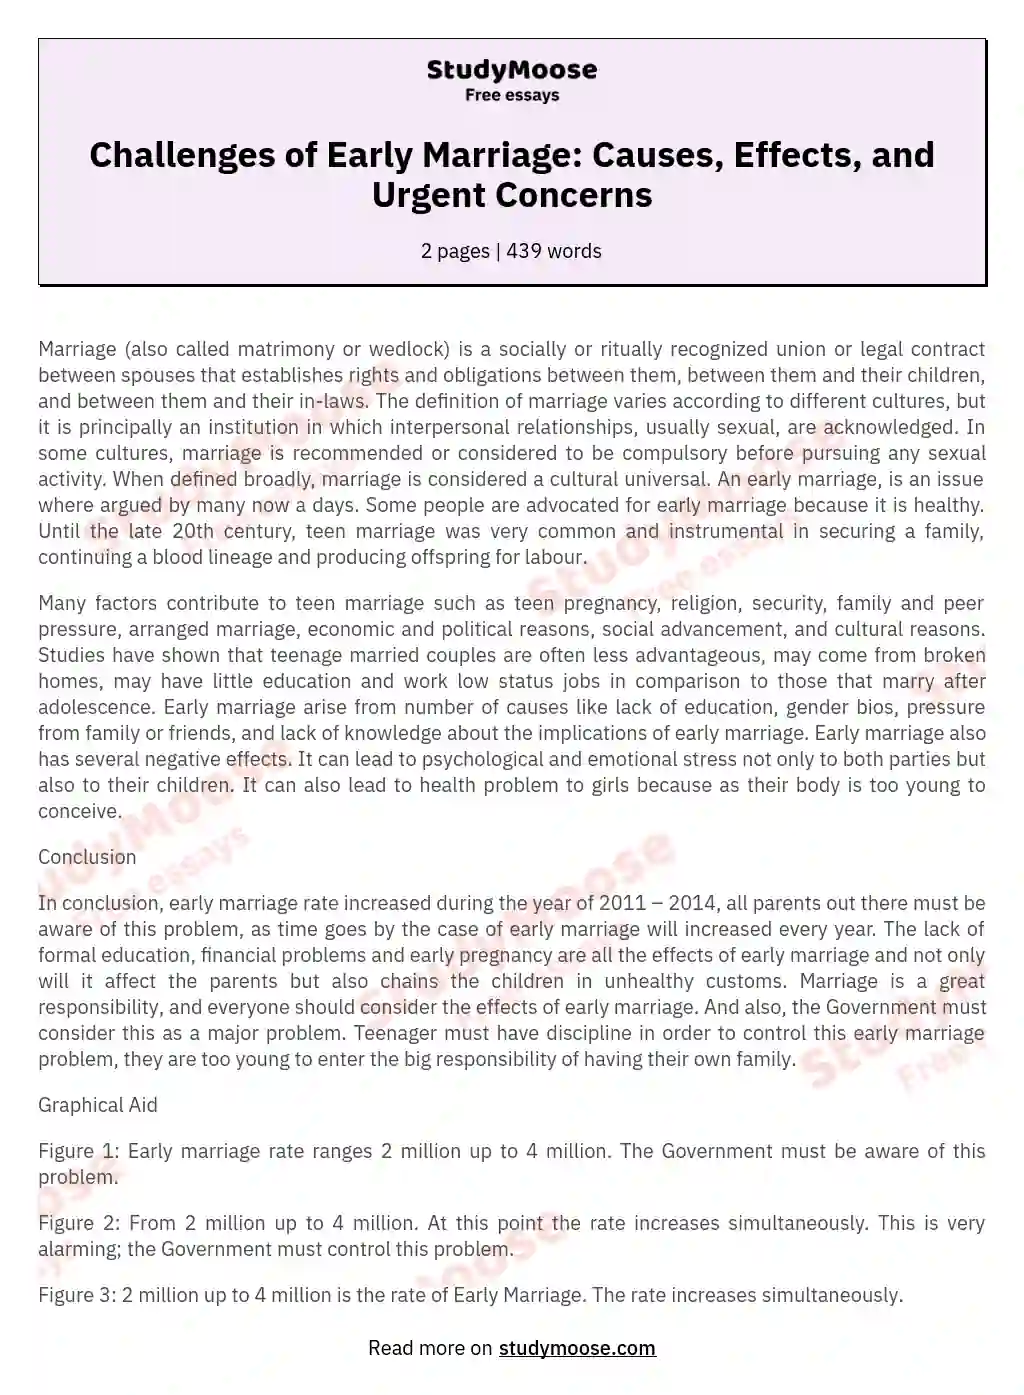 Challenges of Early Marriage: Causes, Effects, and Urgent Concerns essay